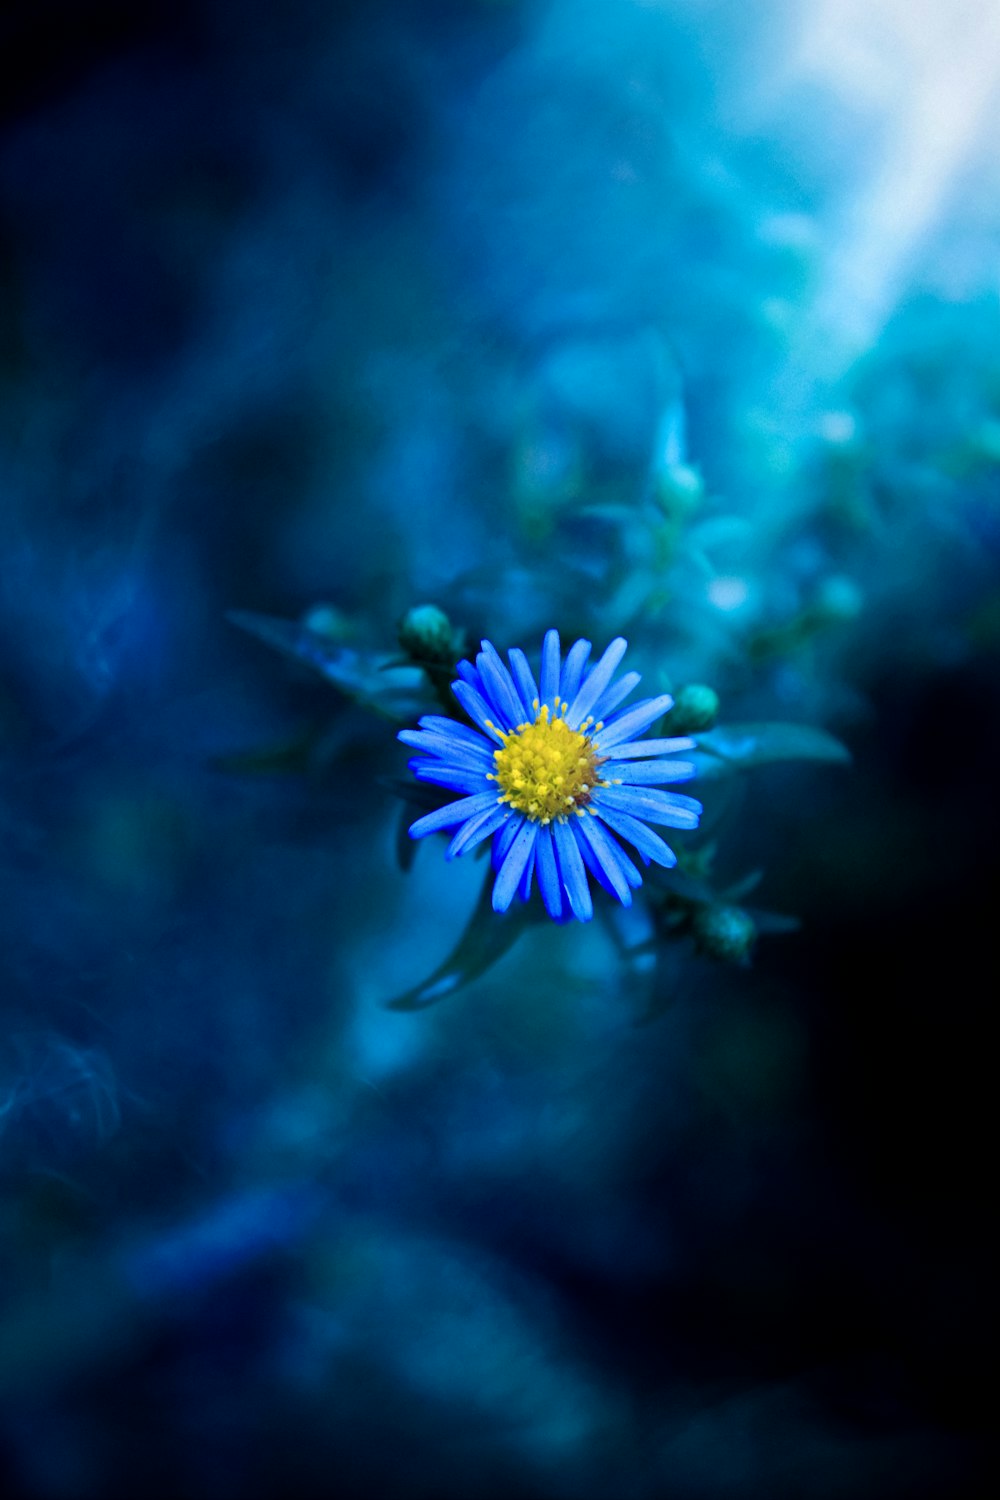 a small blue flower with a yellow center